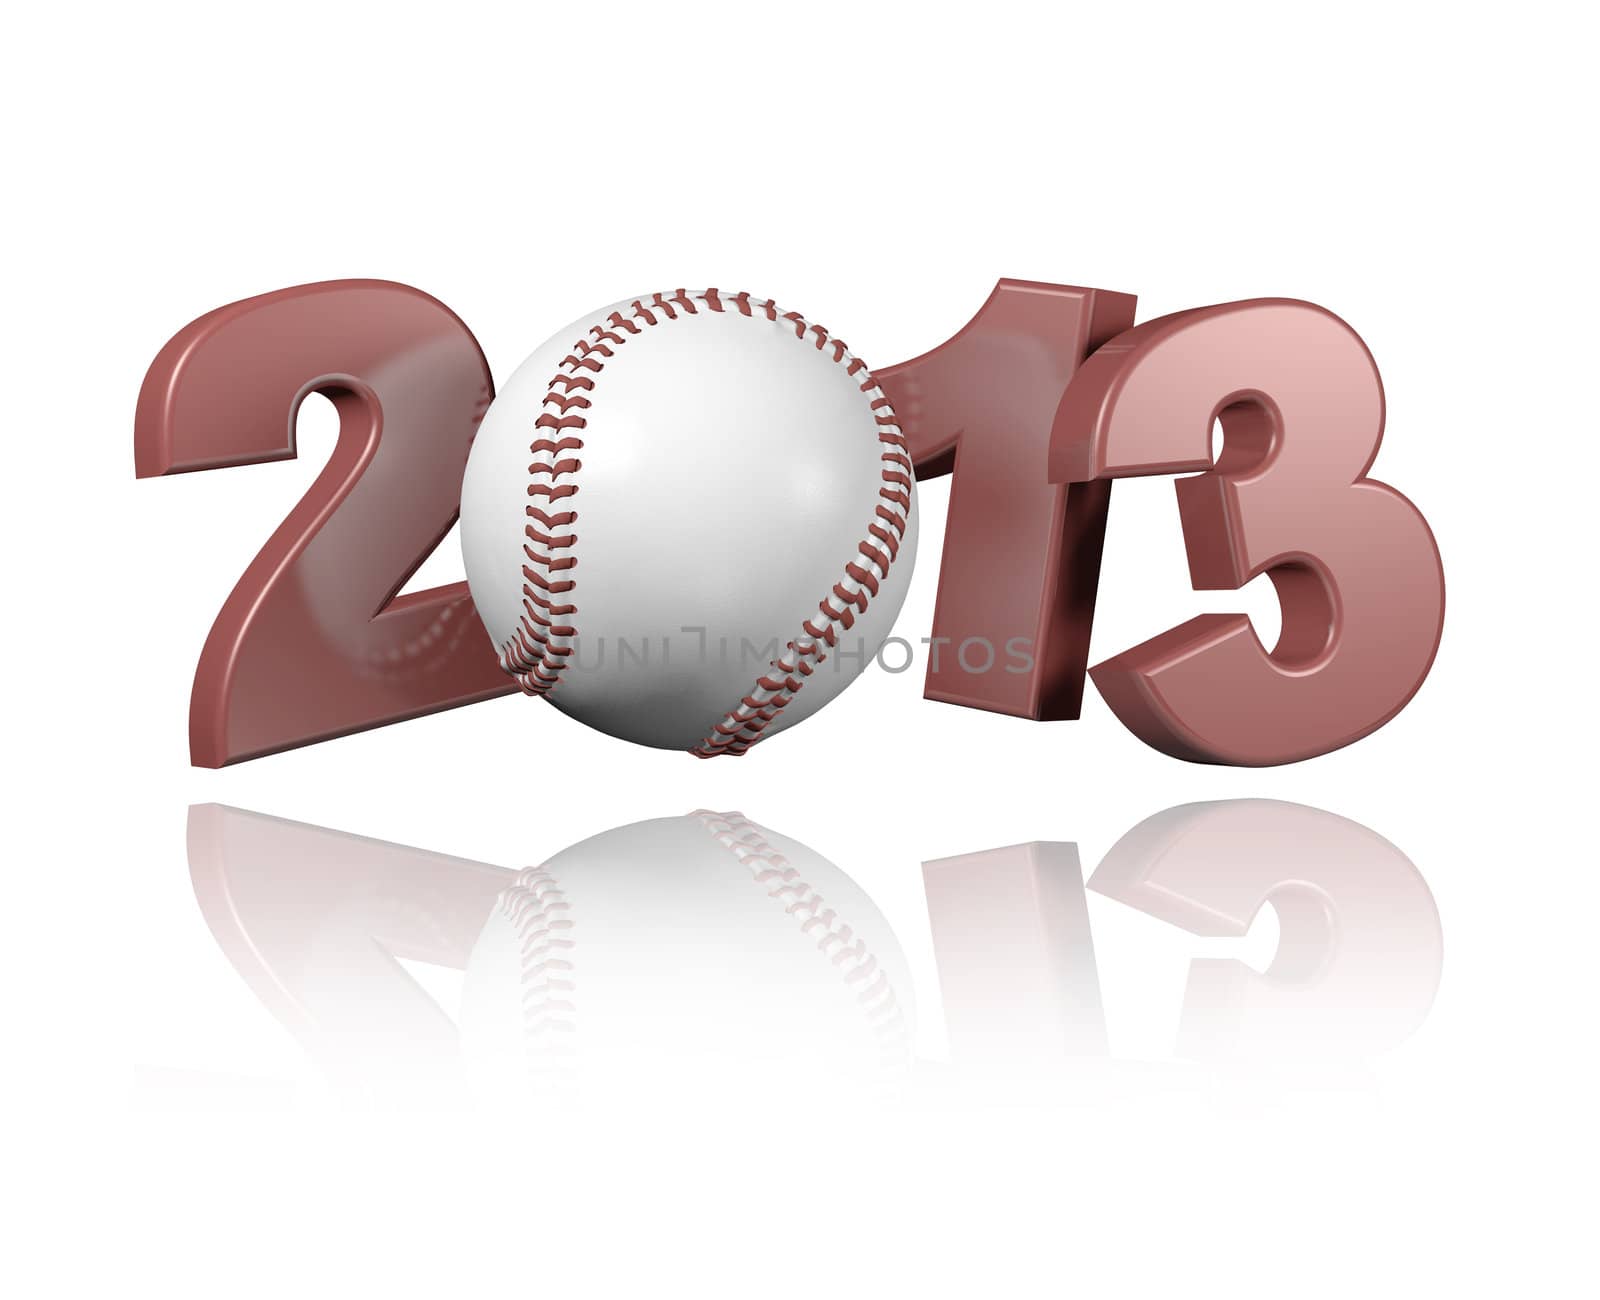 Baseball 2013 design with a white Background